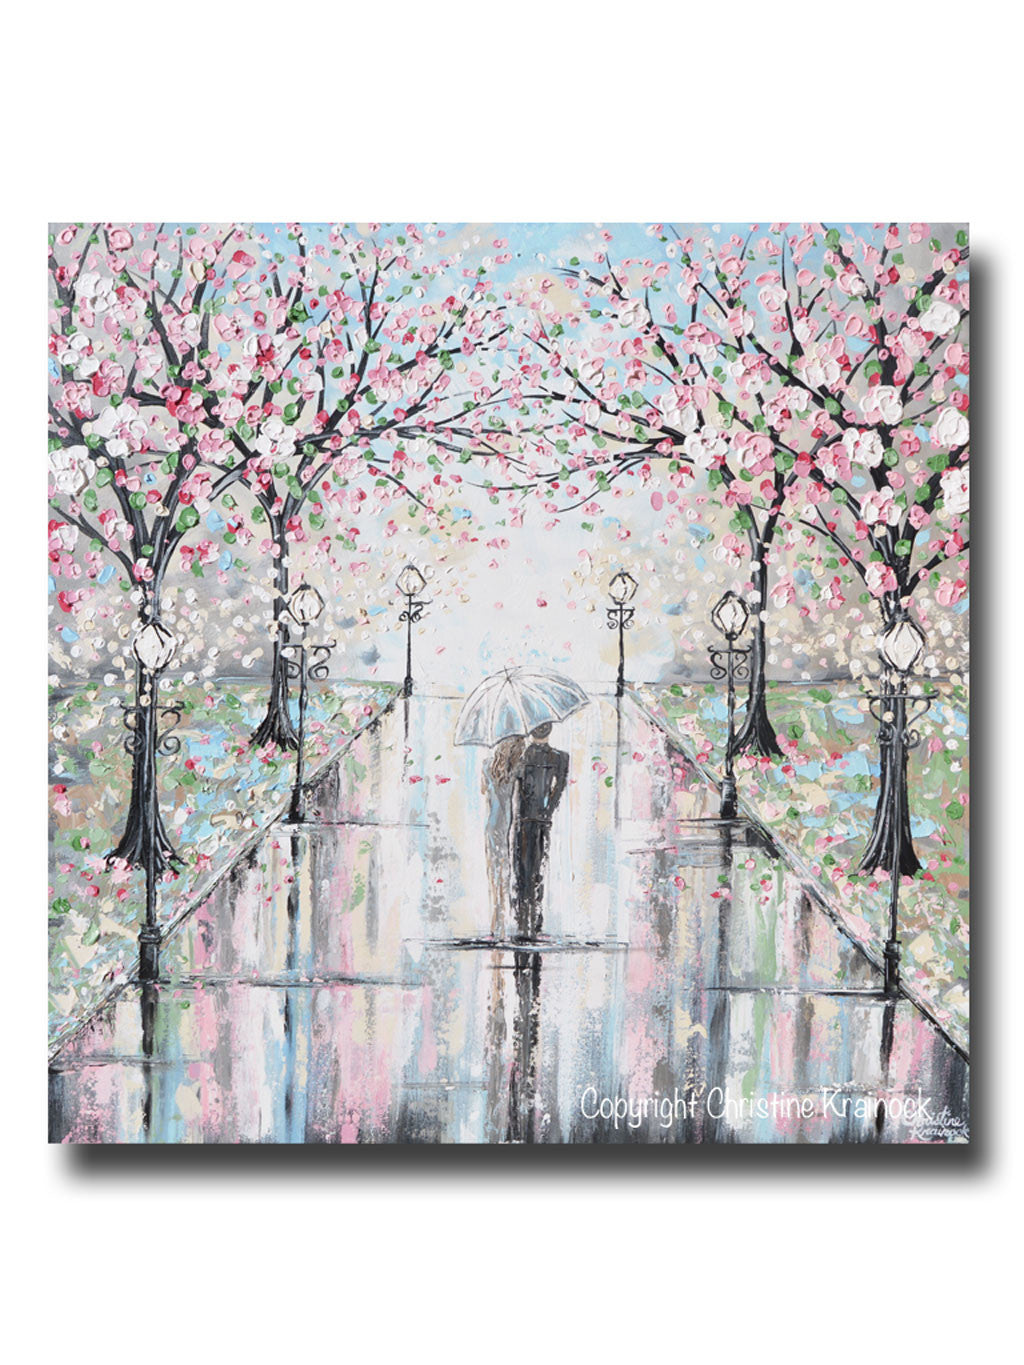 Abstract Tree Painting on Canvas Romantic Wall Art Couple in Love Painting  Romantic Wall Art Impasto Oil Painting as Aesthetic Decor | KINDRED SPIRITS